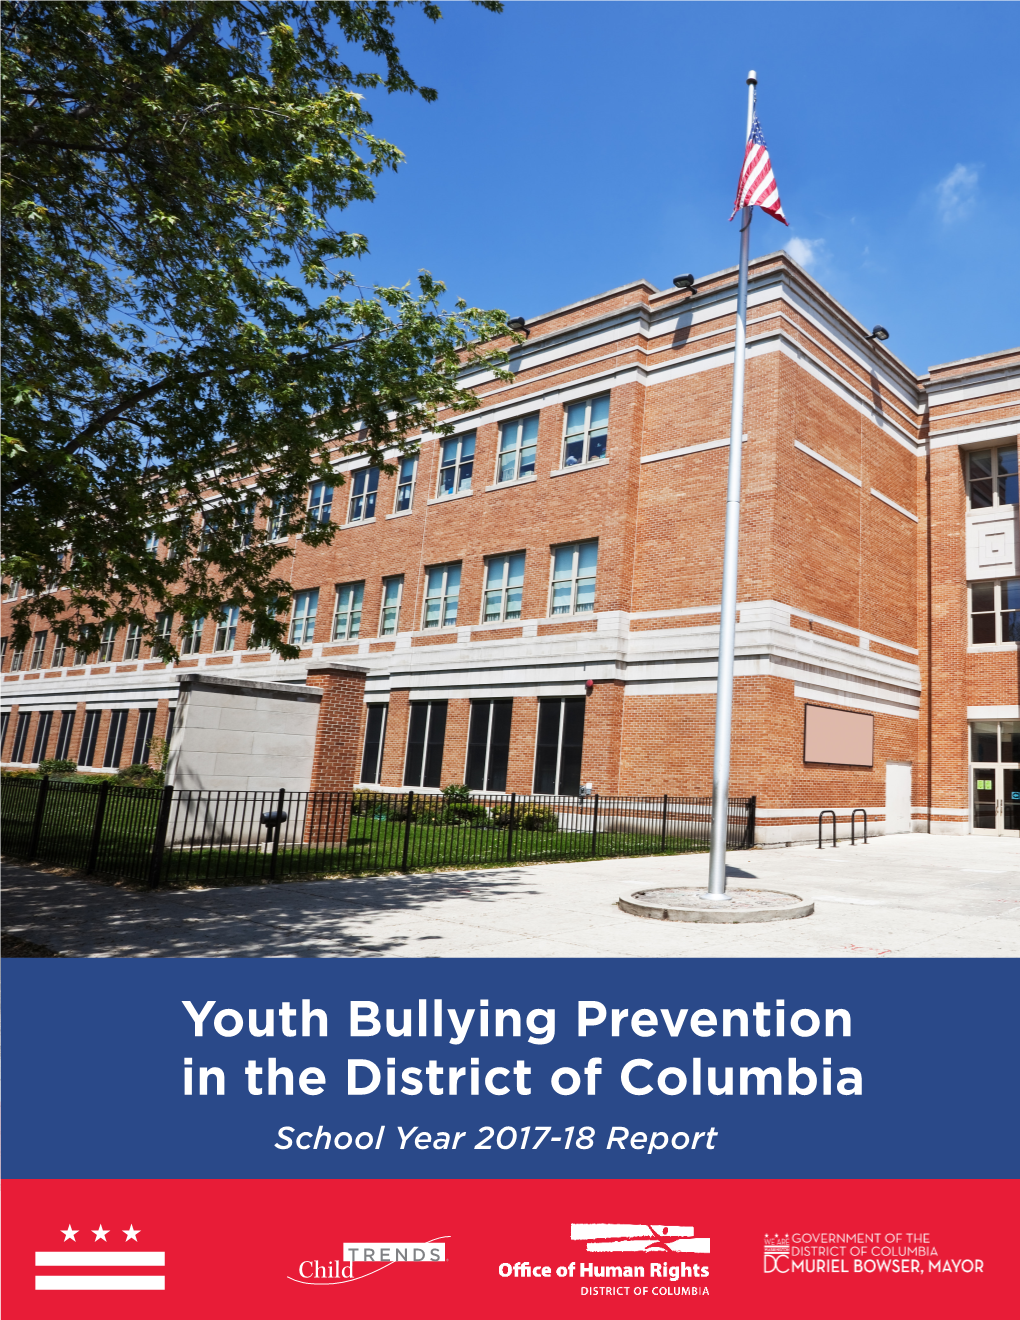 Youth Bullying Prevention in the District of Columbia